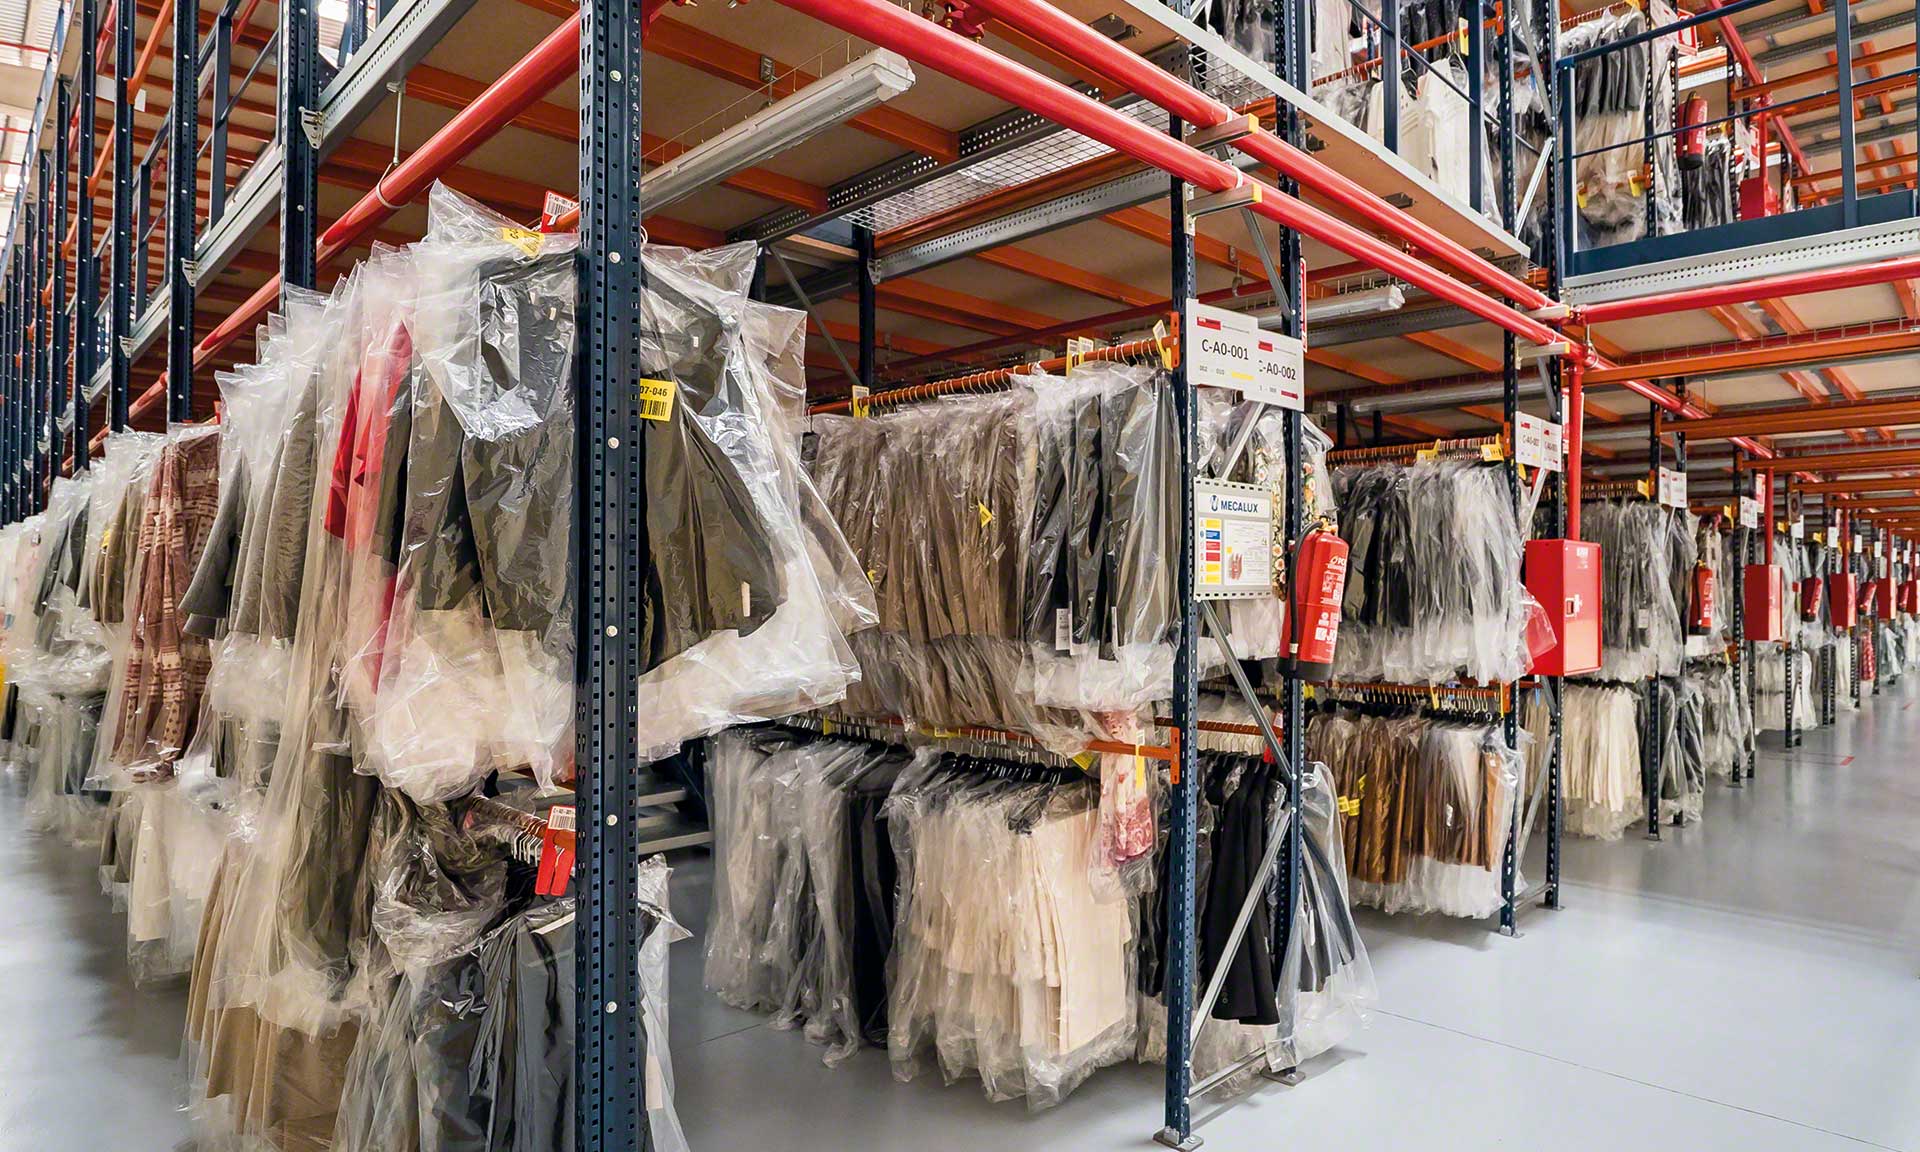 Warehouse clothing racking are specific storage systems used to store garments in an upright position